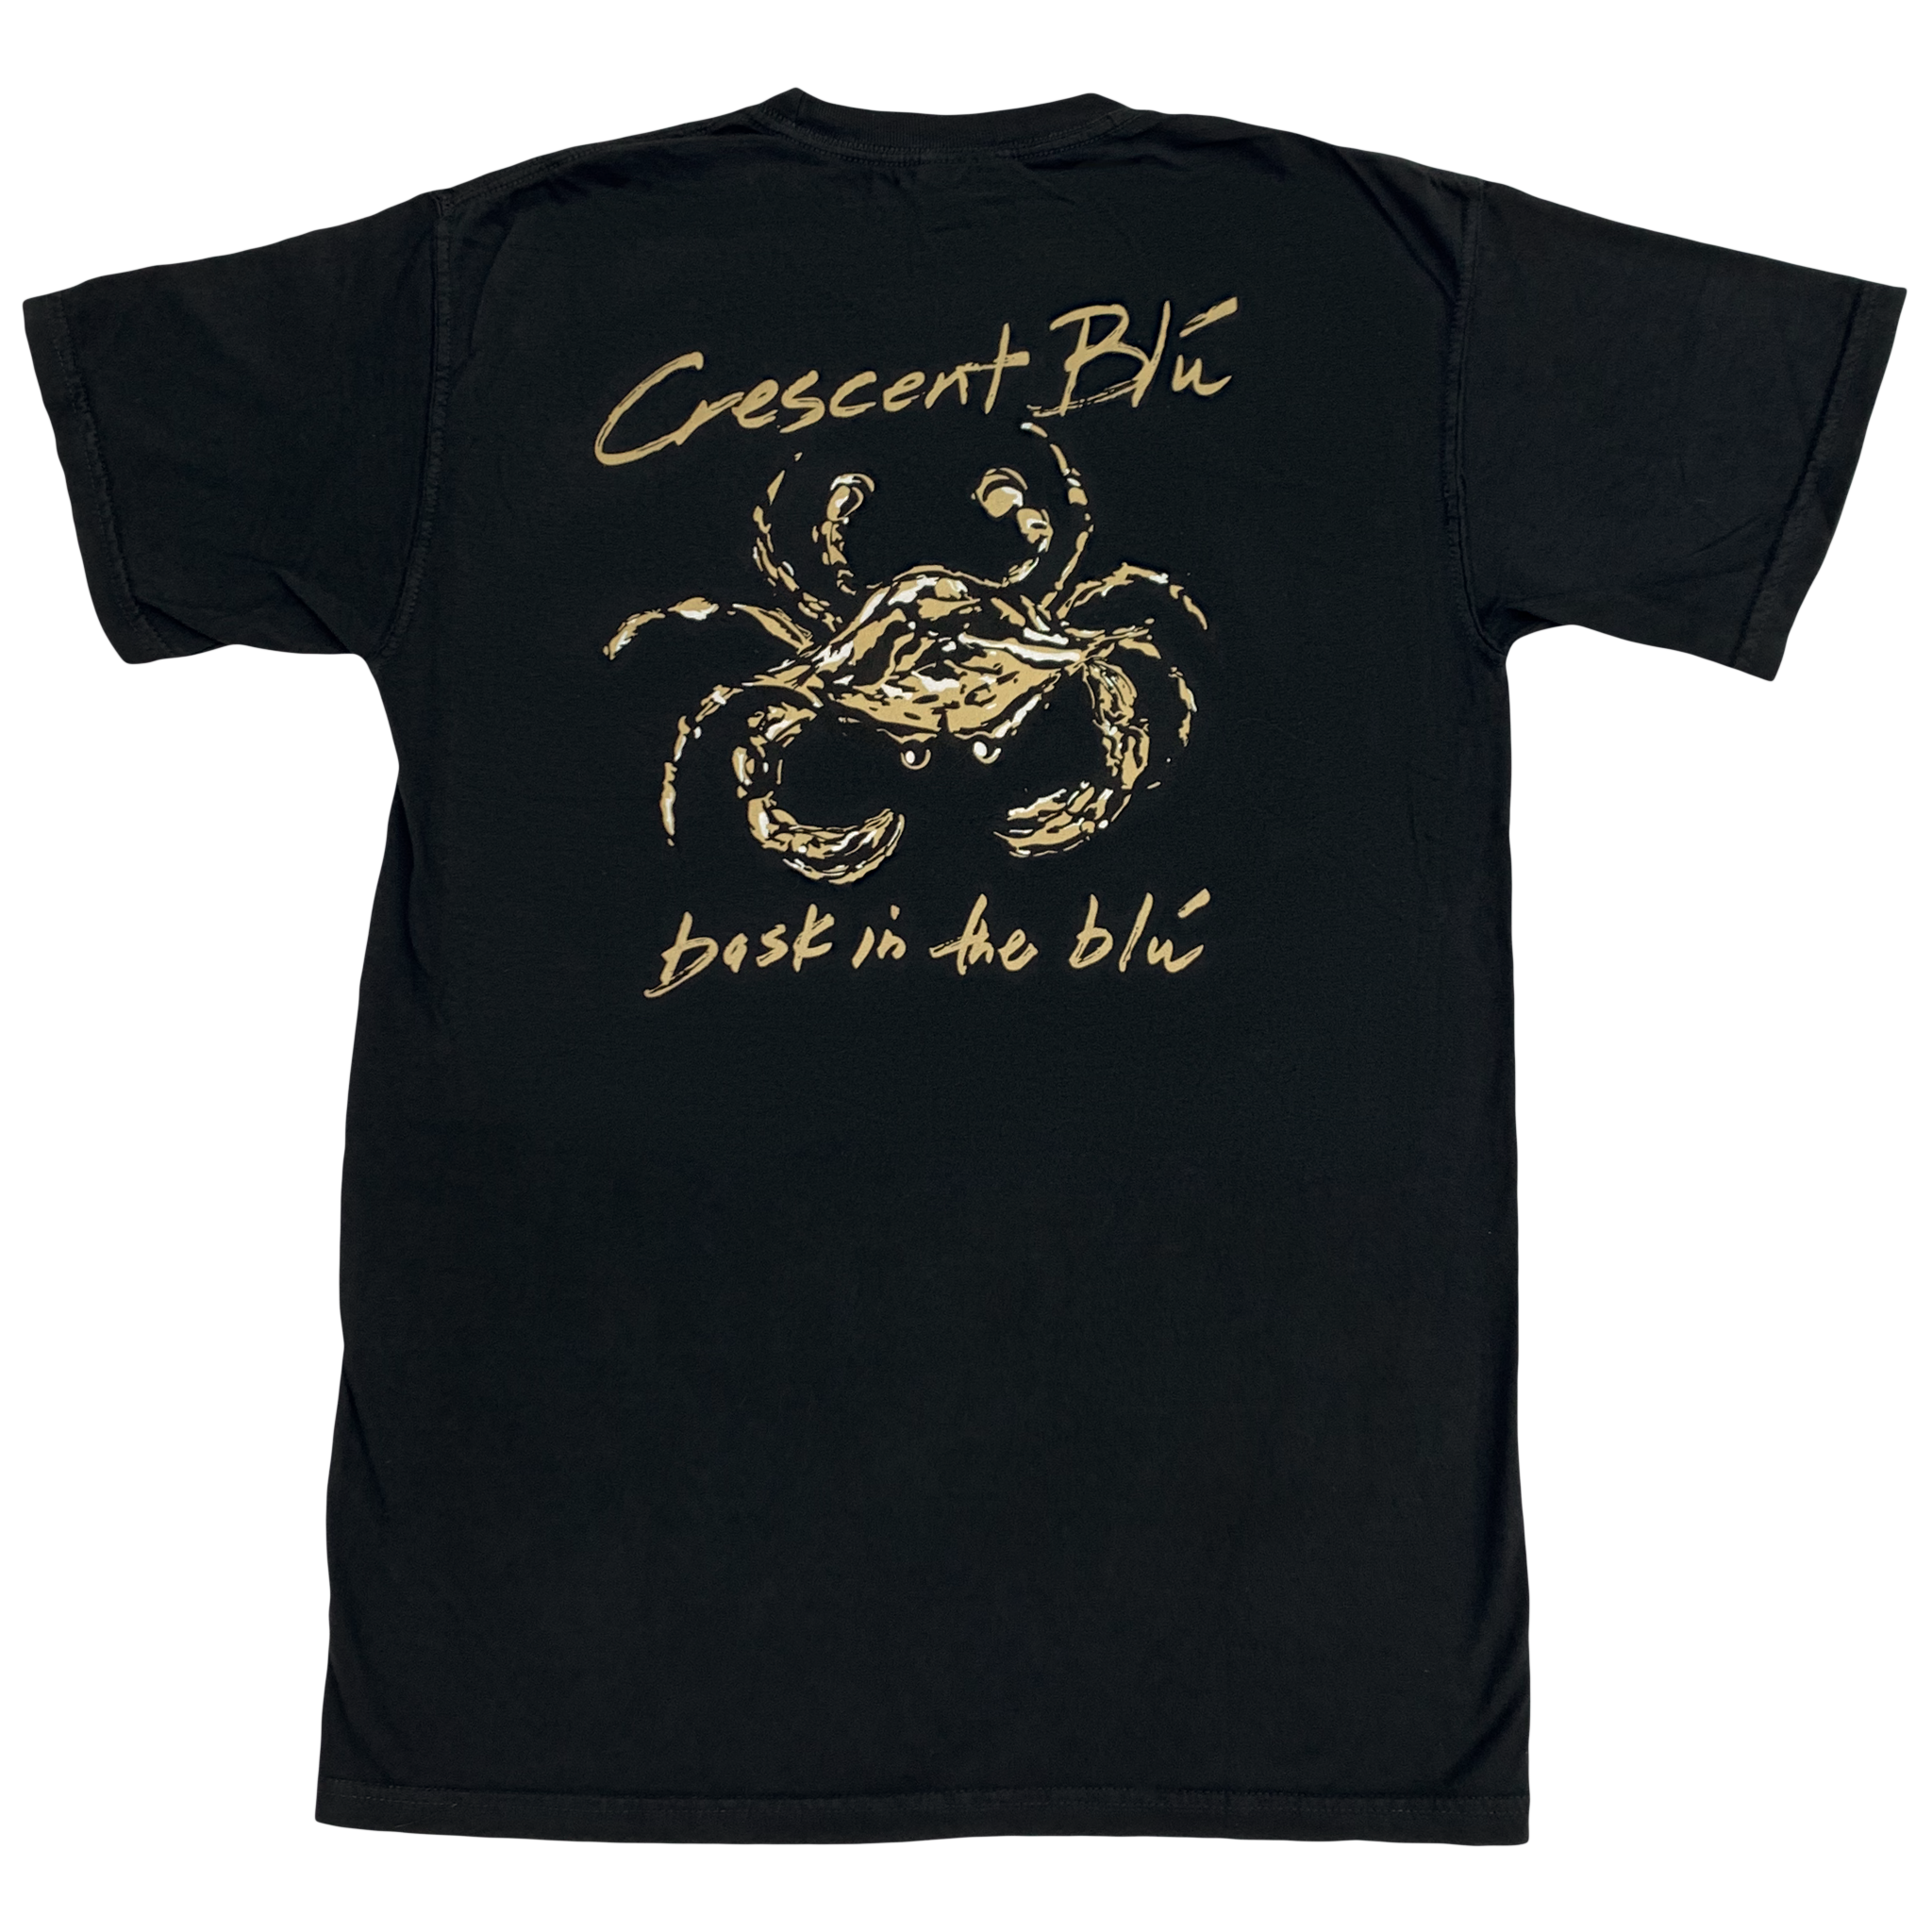 A black, gold, and white crab centered on the back of a short sleeve black cotton crew neck t-shirt. In gold above the crab is Crescent Blu, below the crab in gold is bask in the blu.